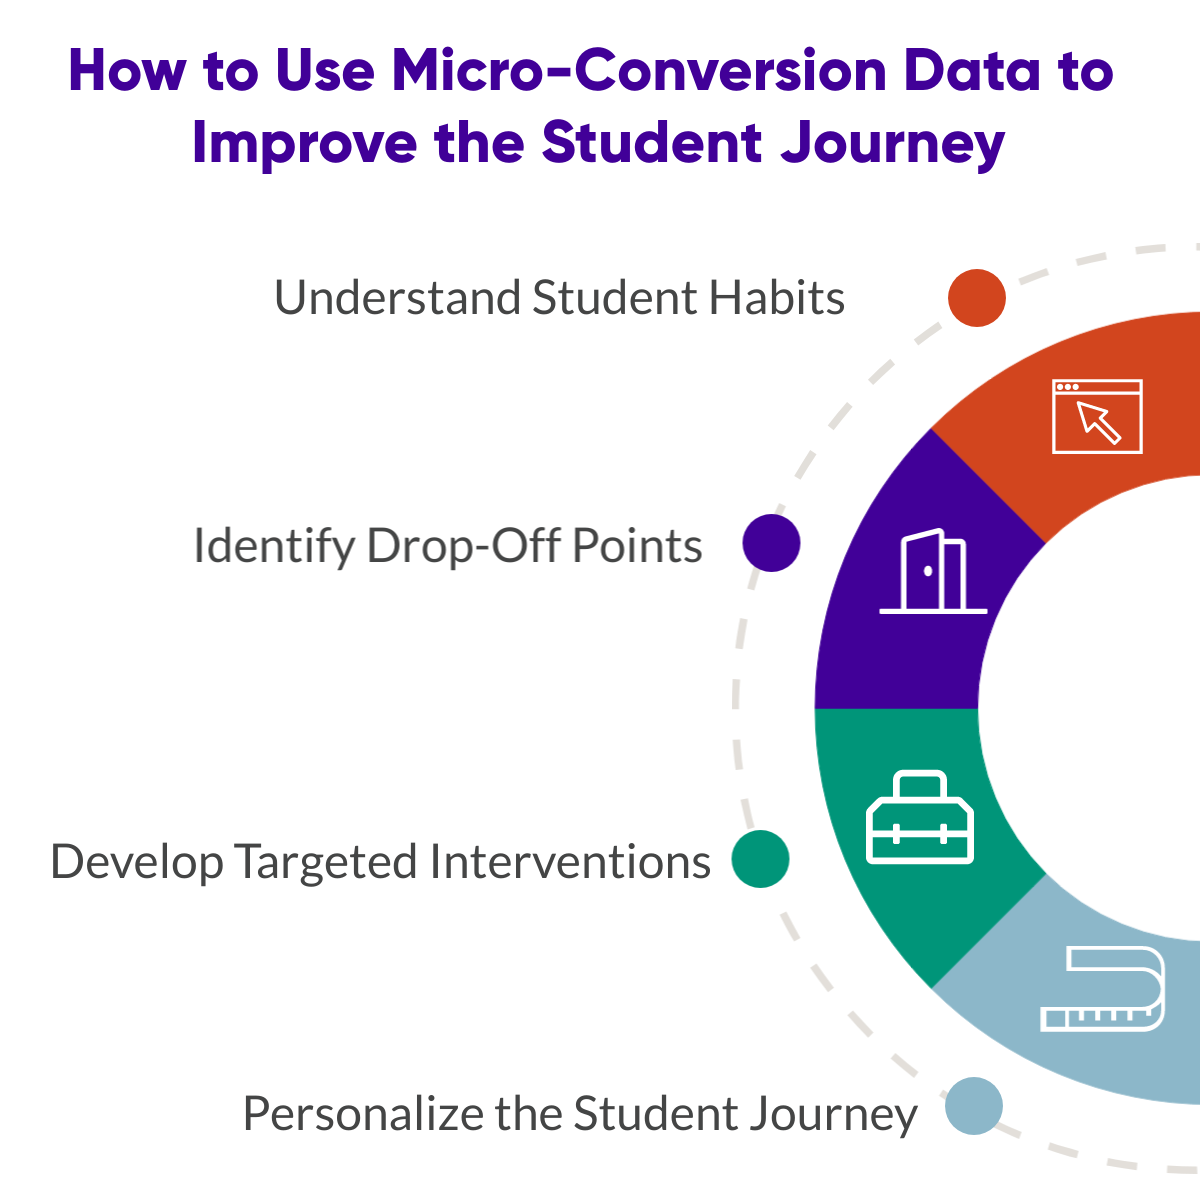 Infographic: How to use micro-conversion data for student journey improvement - Enhance the student experience by following these steps - Understand habits, Identify Drop-Off Points, Develop Targeted Interventions, Personalize the Journey.